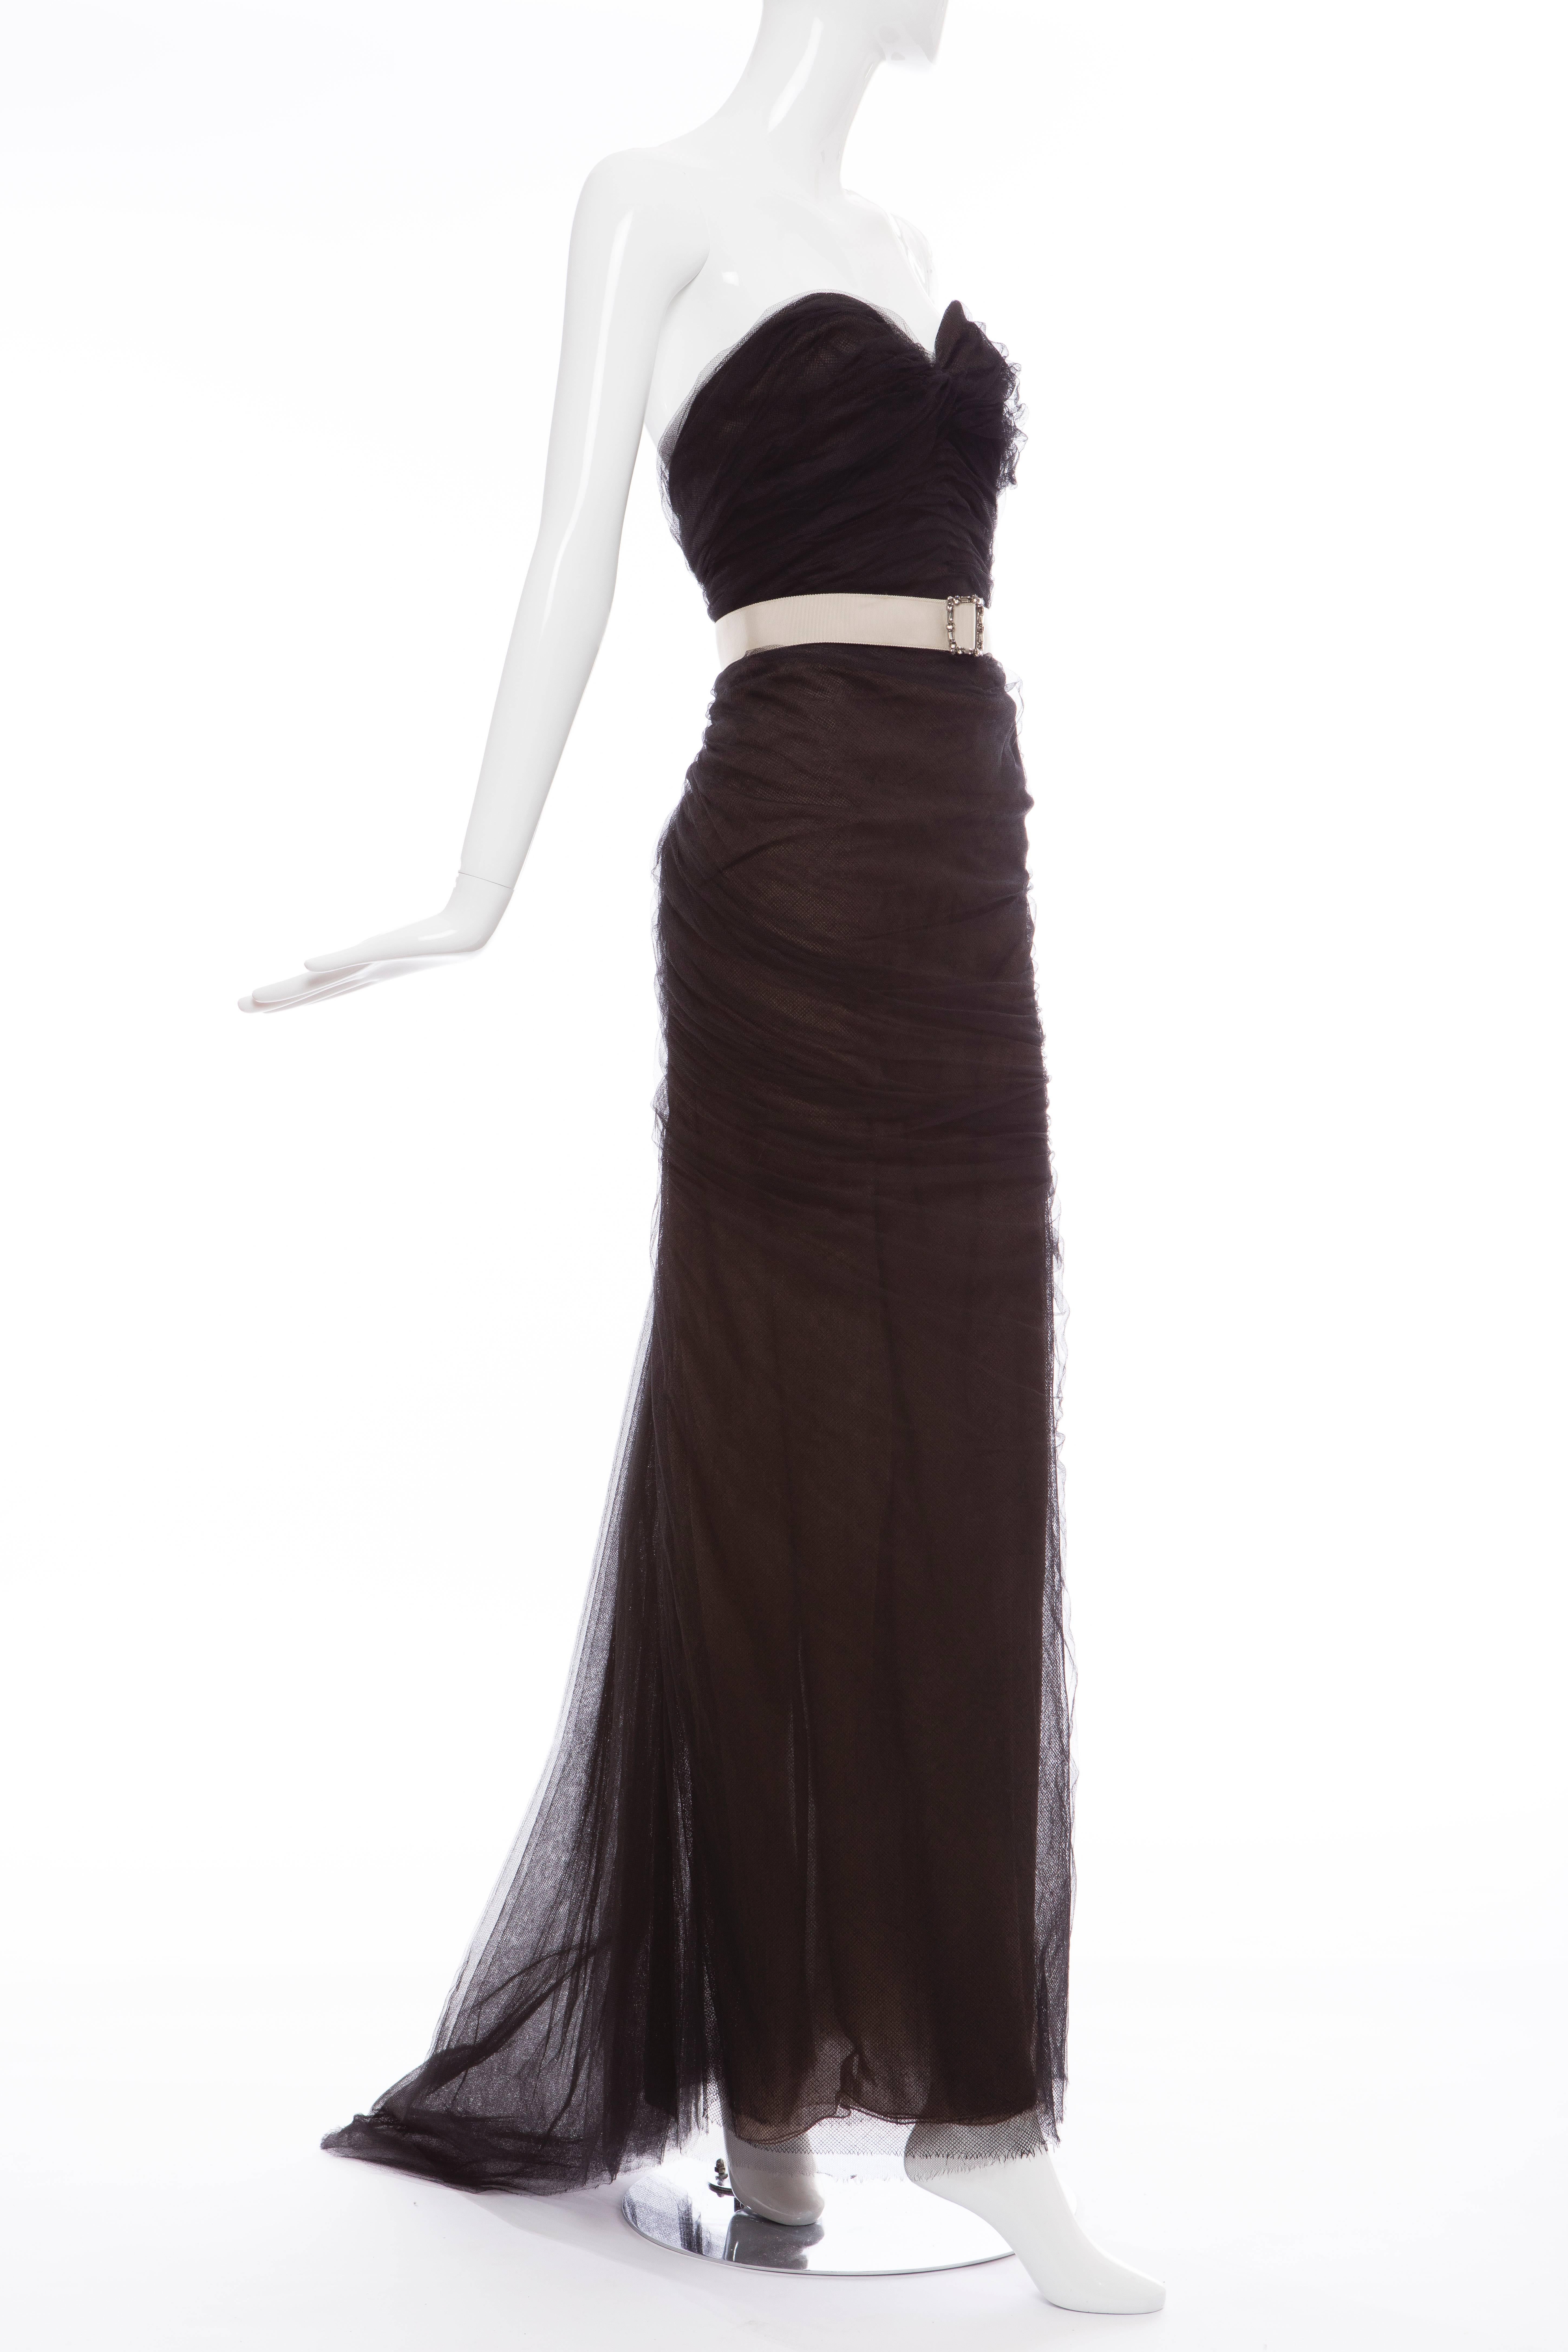 Lanvin by Alber Elbaz, Autumn-Winter 2006, black tulle evening dress with sweetheart bustier, grosgrain belt with embellished buckle at waist, reinforced bust and back zip closure.

Bust 32”, Waist 30